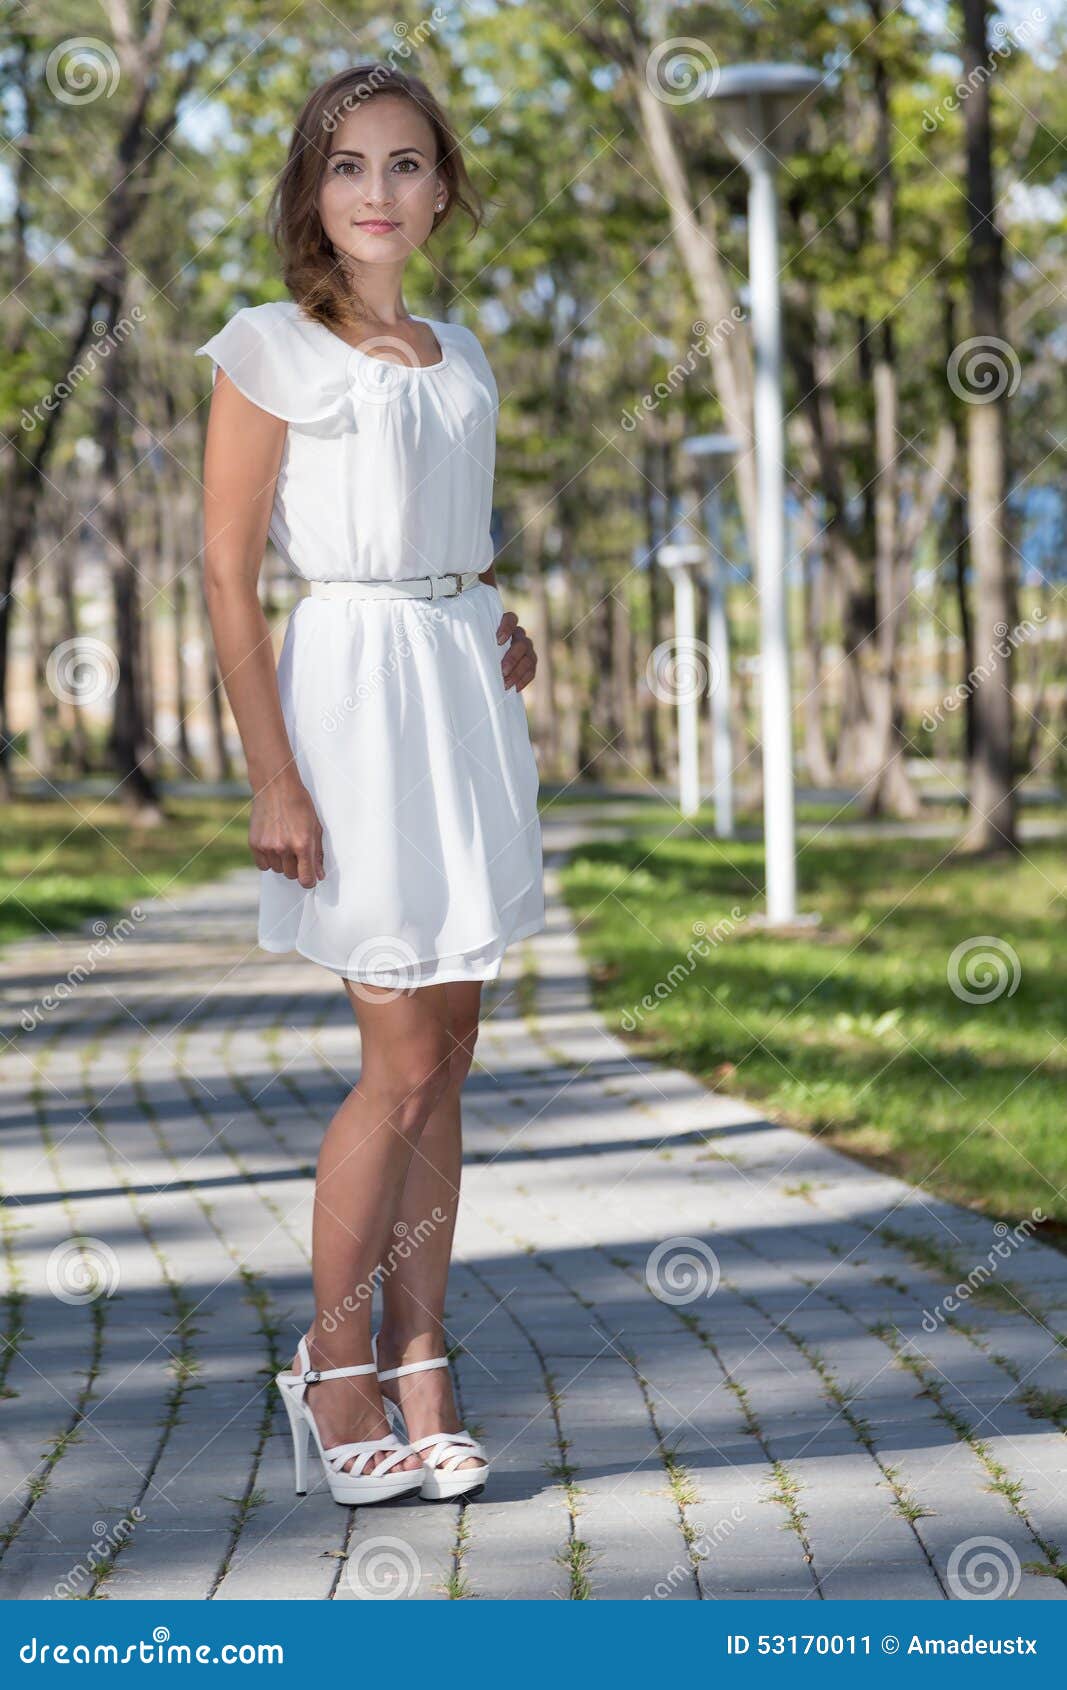 Young Girl in White Dress Standing Stock Image - Image of feminine ...